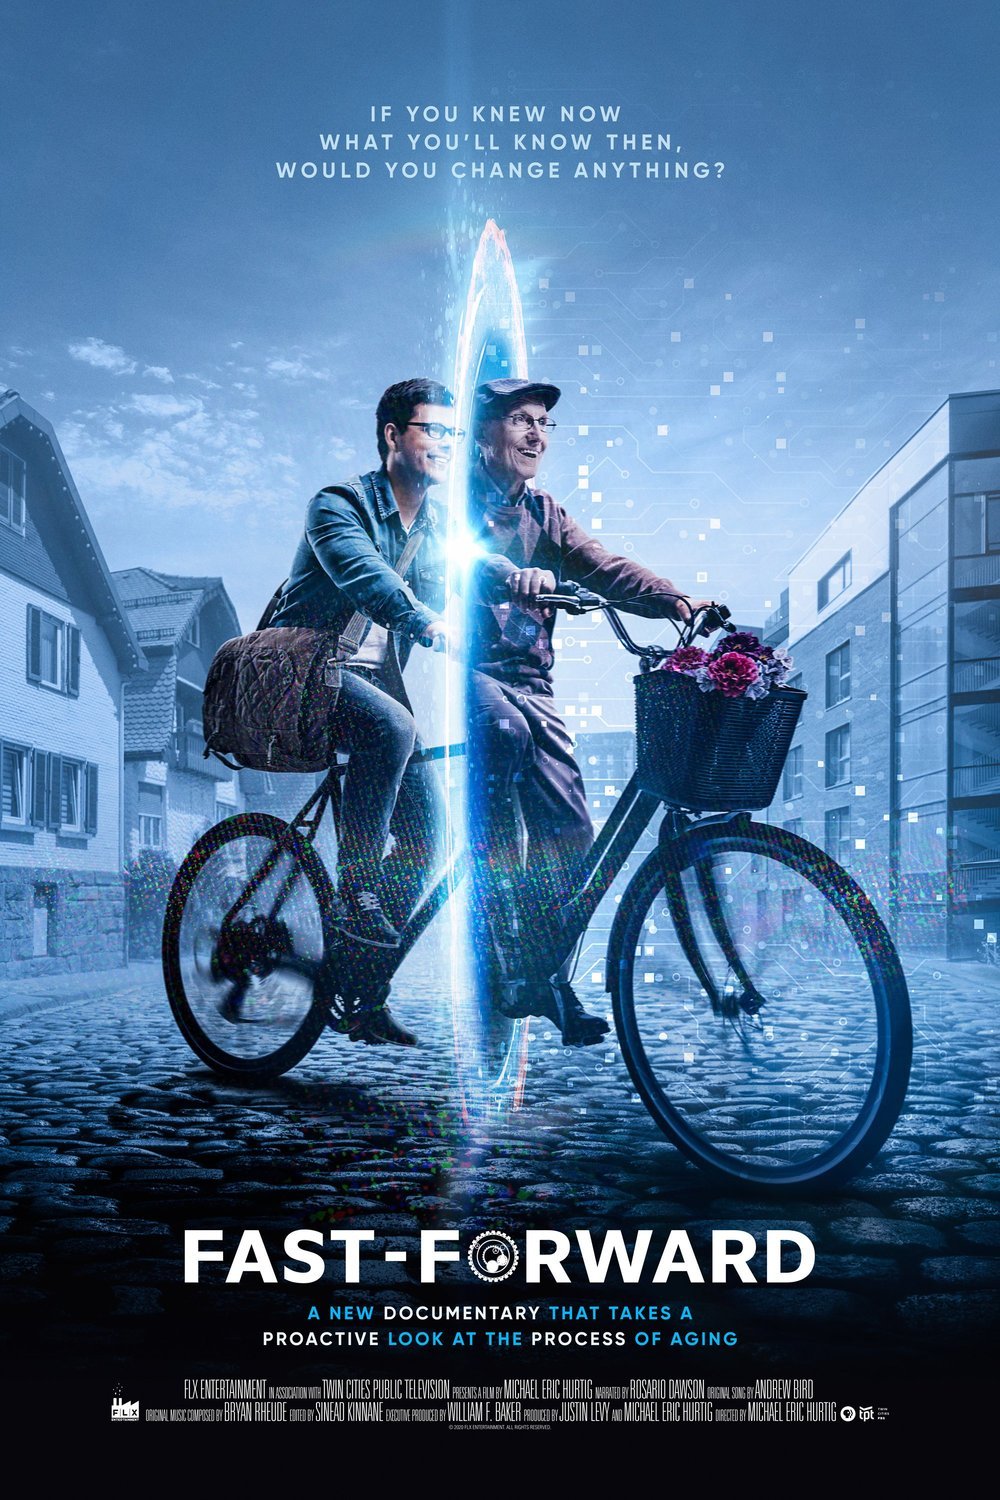 Poster of the movie Fast-Forward